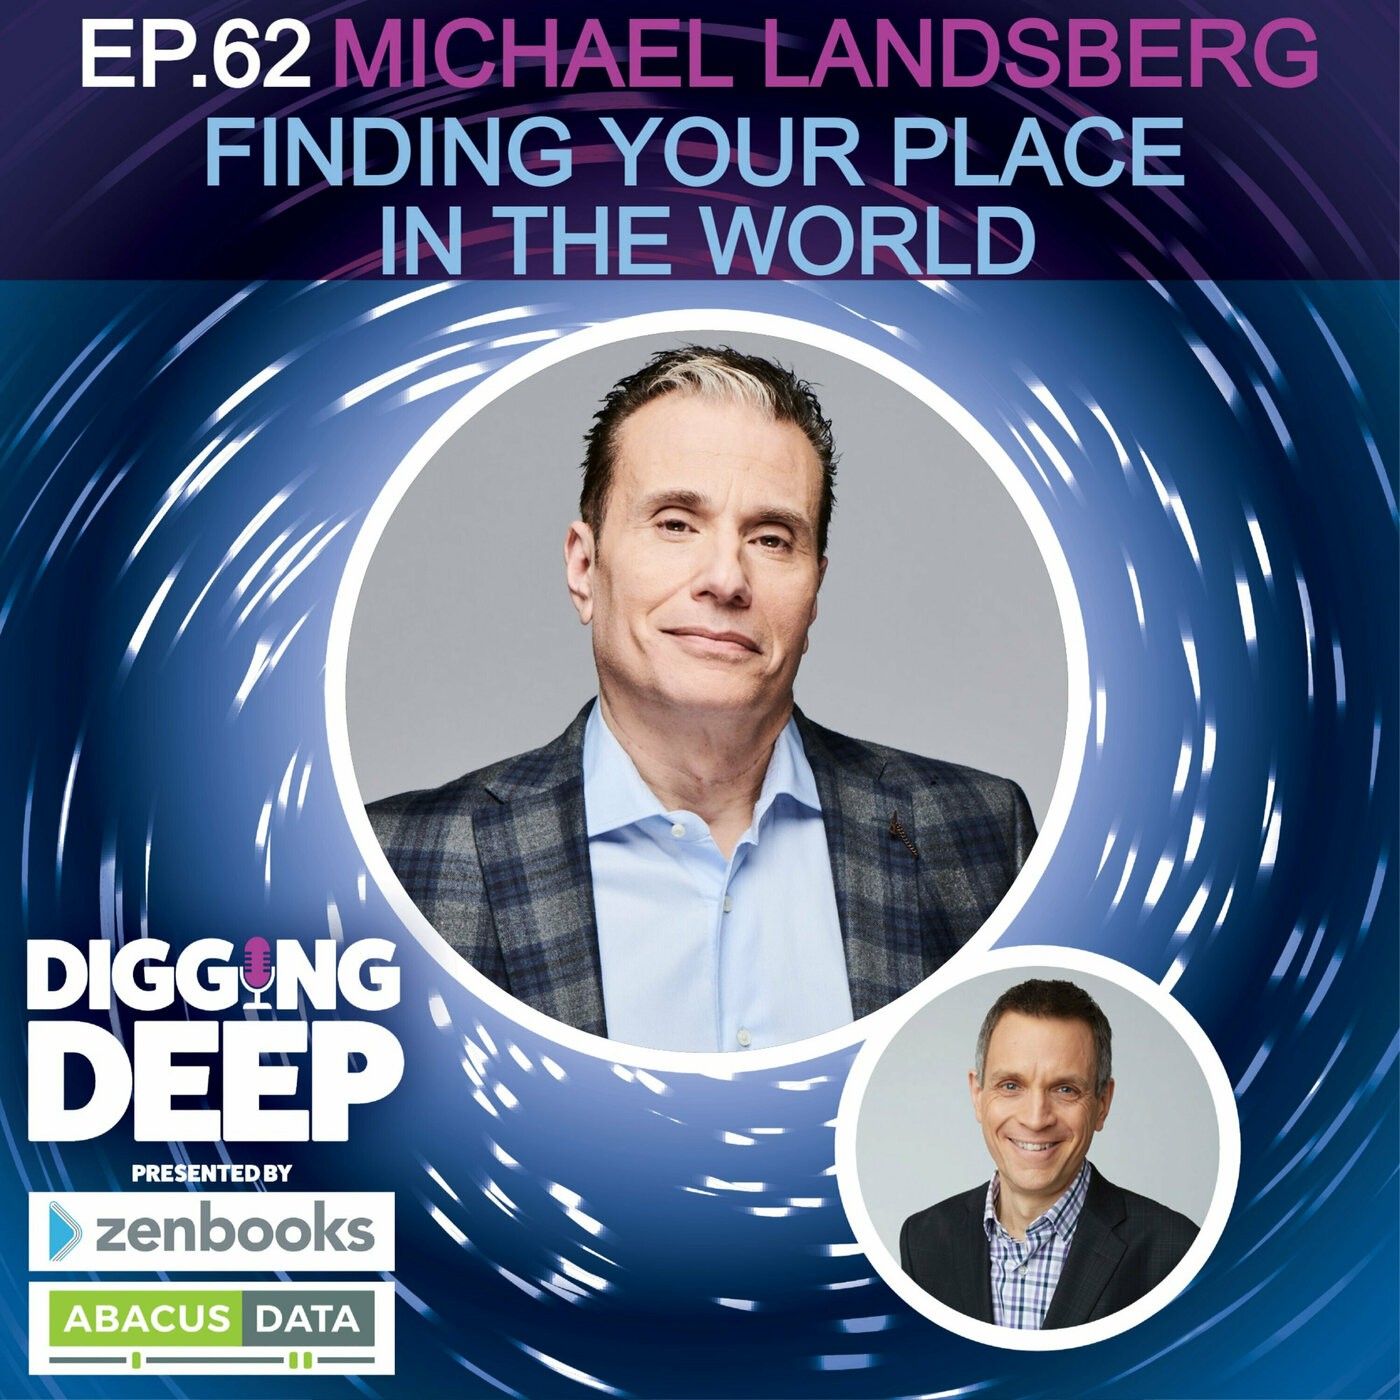 Michael Landsberg: Finding Your Place in the World